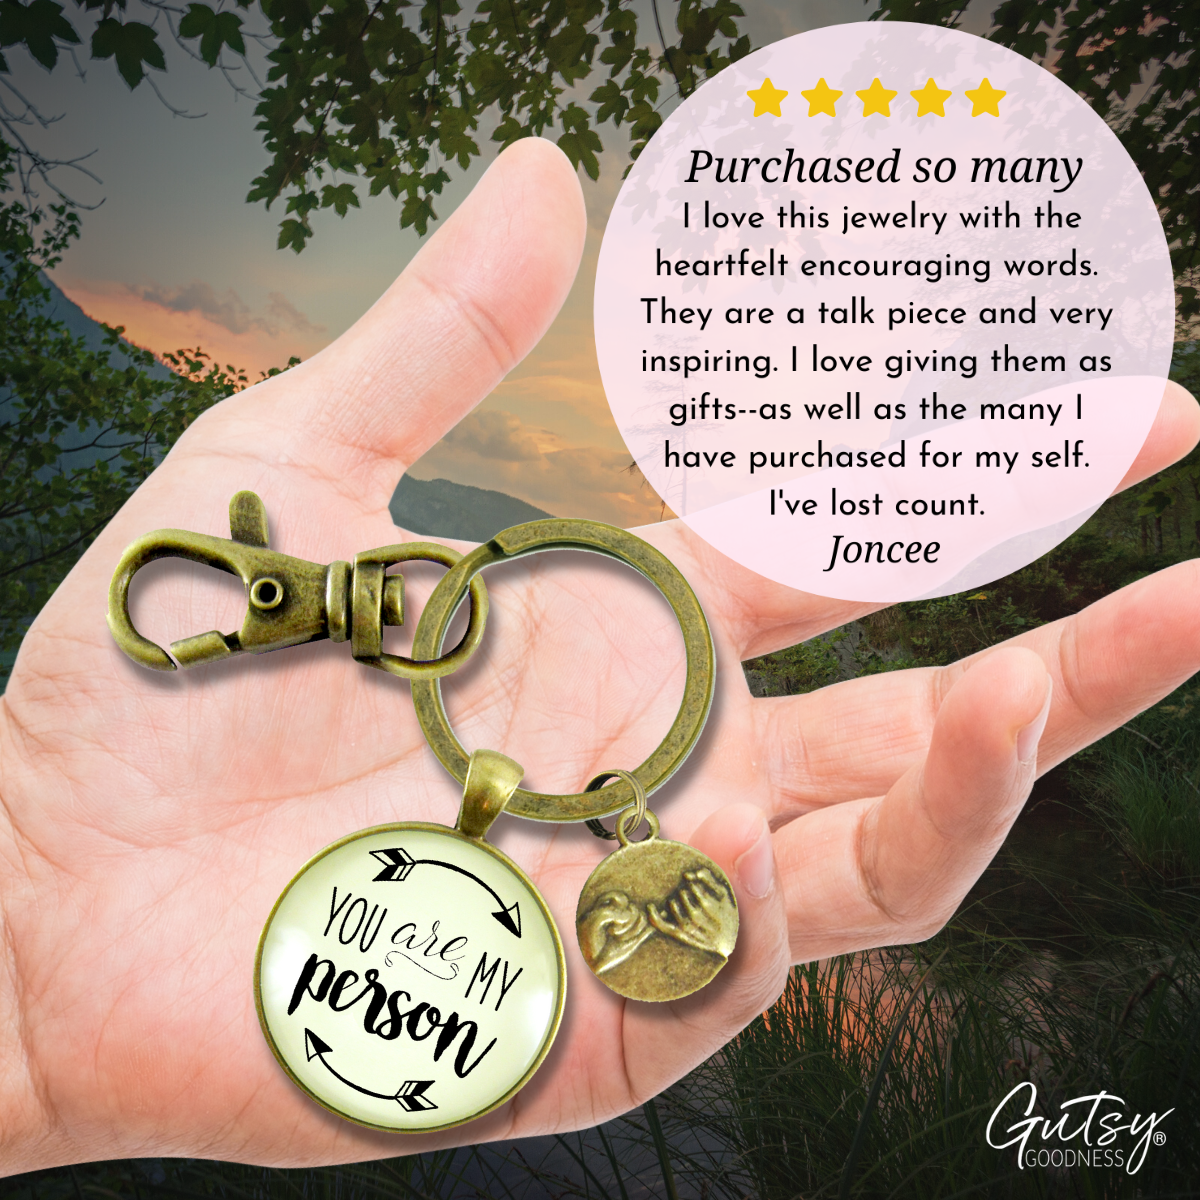 You Are My Person Best Friends Keychain Quote Special Relationship Pinky Promise Gift - Gutsy Goodness Handmade Jewelry;You Are My Person Best Friends Keychain Quote Special Relationship Pinky Promise Gift - Gutsy Goodness Handmade Jewelry Gifts